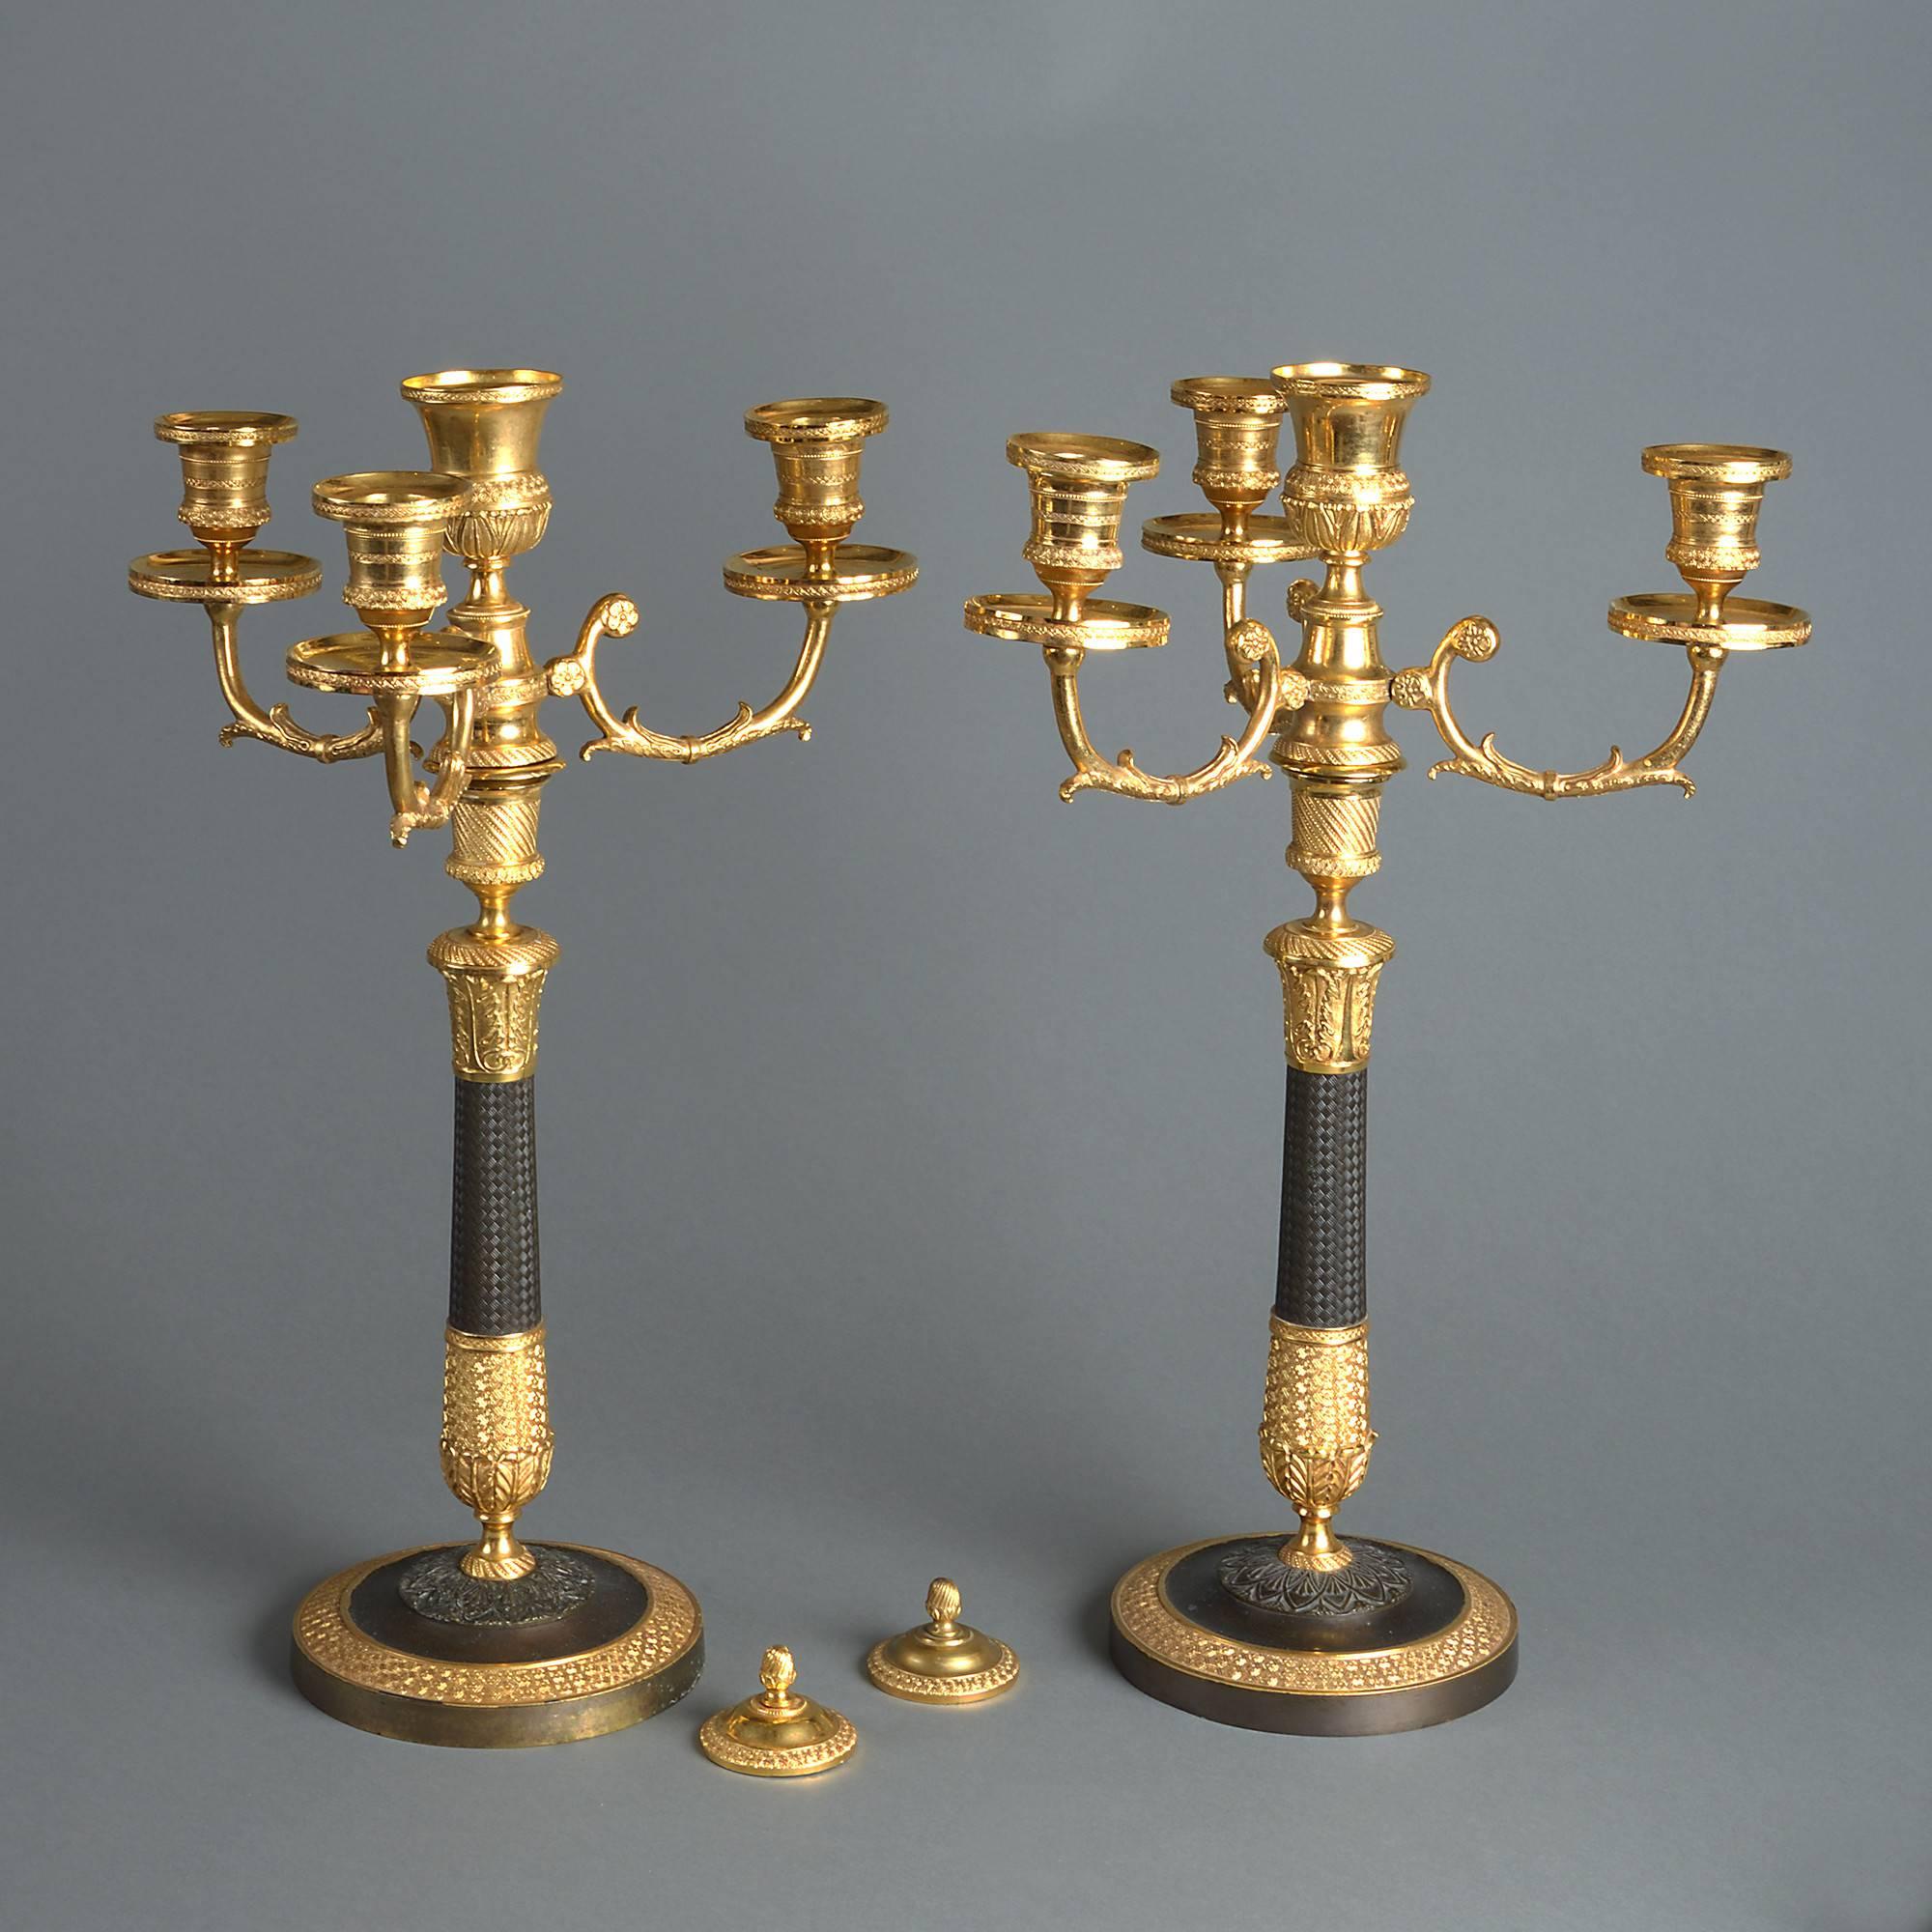 A fine pair of three branch ormolu and bronze table candelabra, finely cast and chased, each having an additional central socle with removable covers.